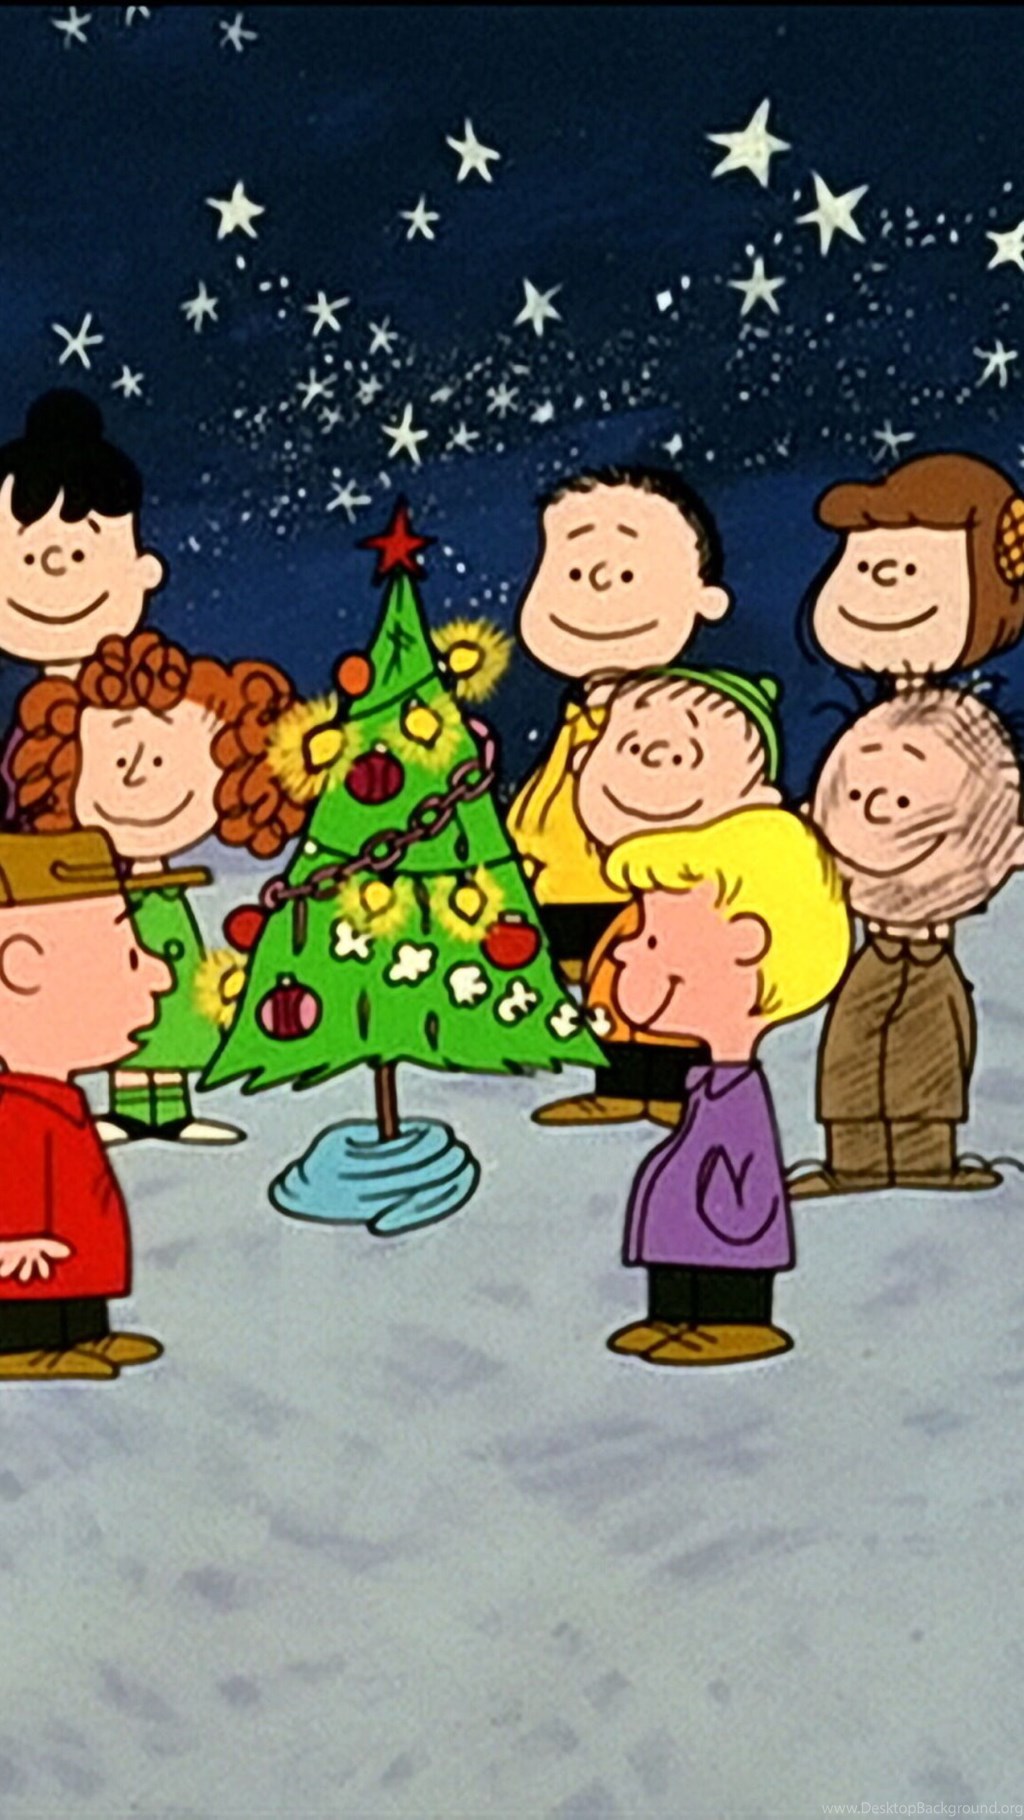 41-411540_a-charlie-brown-christmas-wallpapers-for-iphone-6.jpg